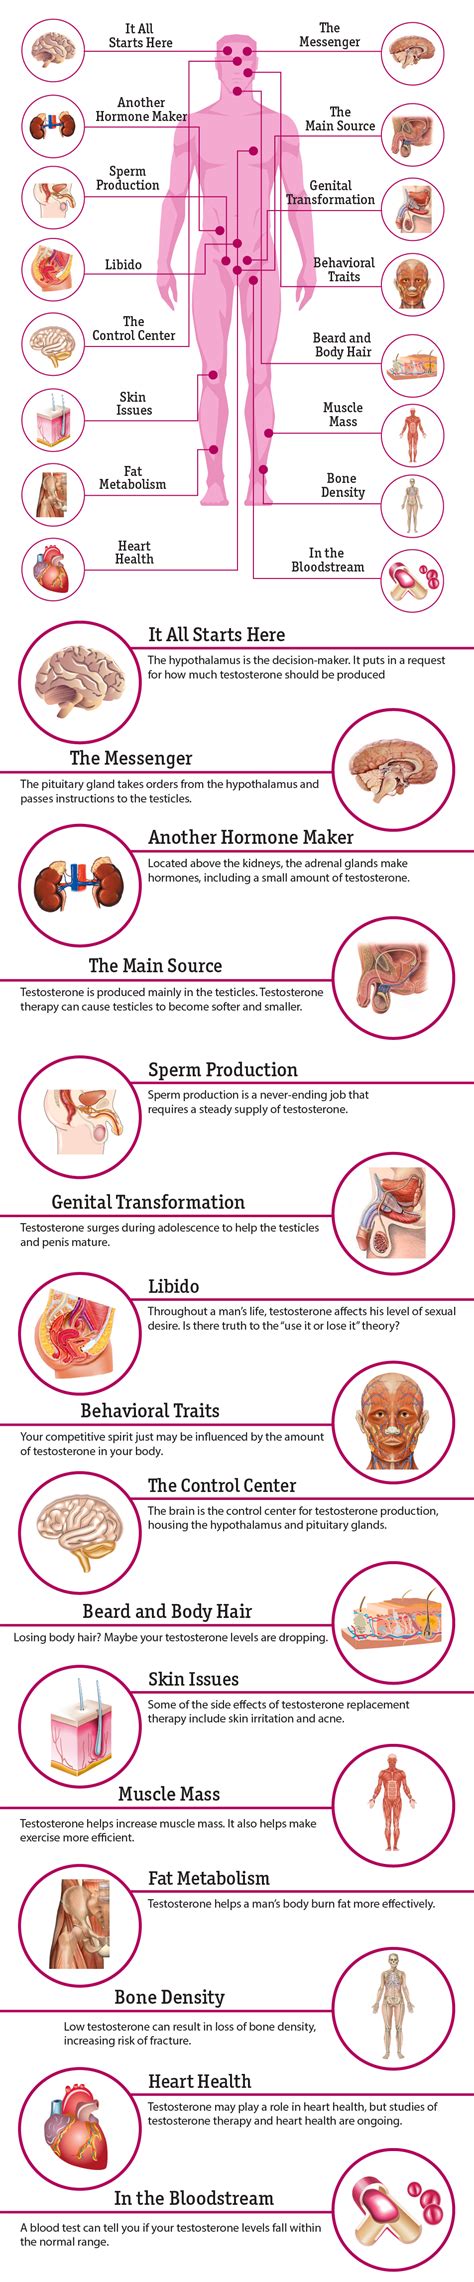 16 Effects Of Testosterone On The Body